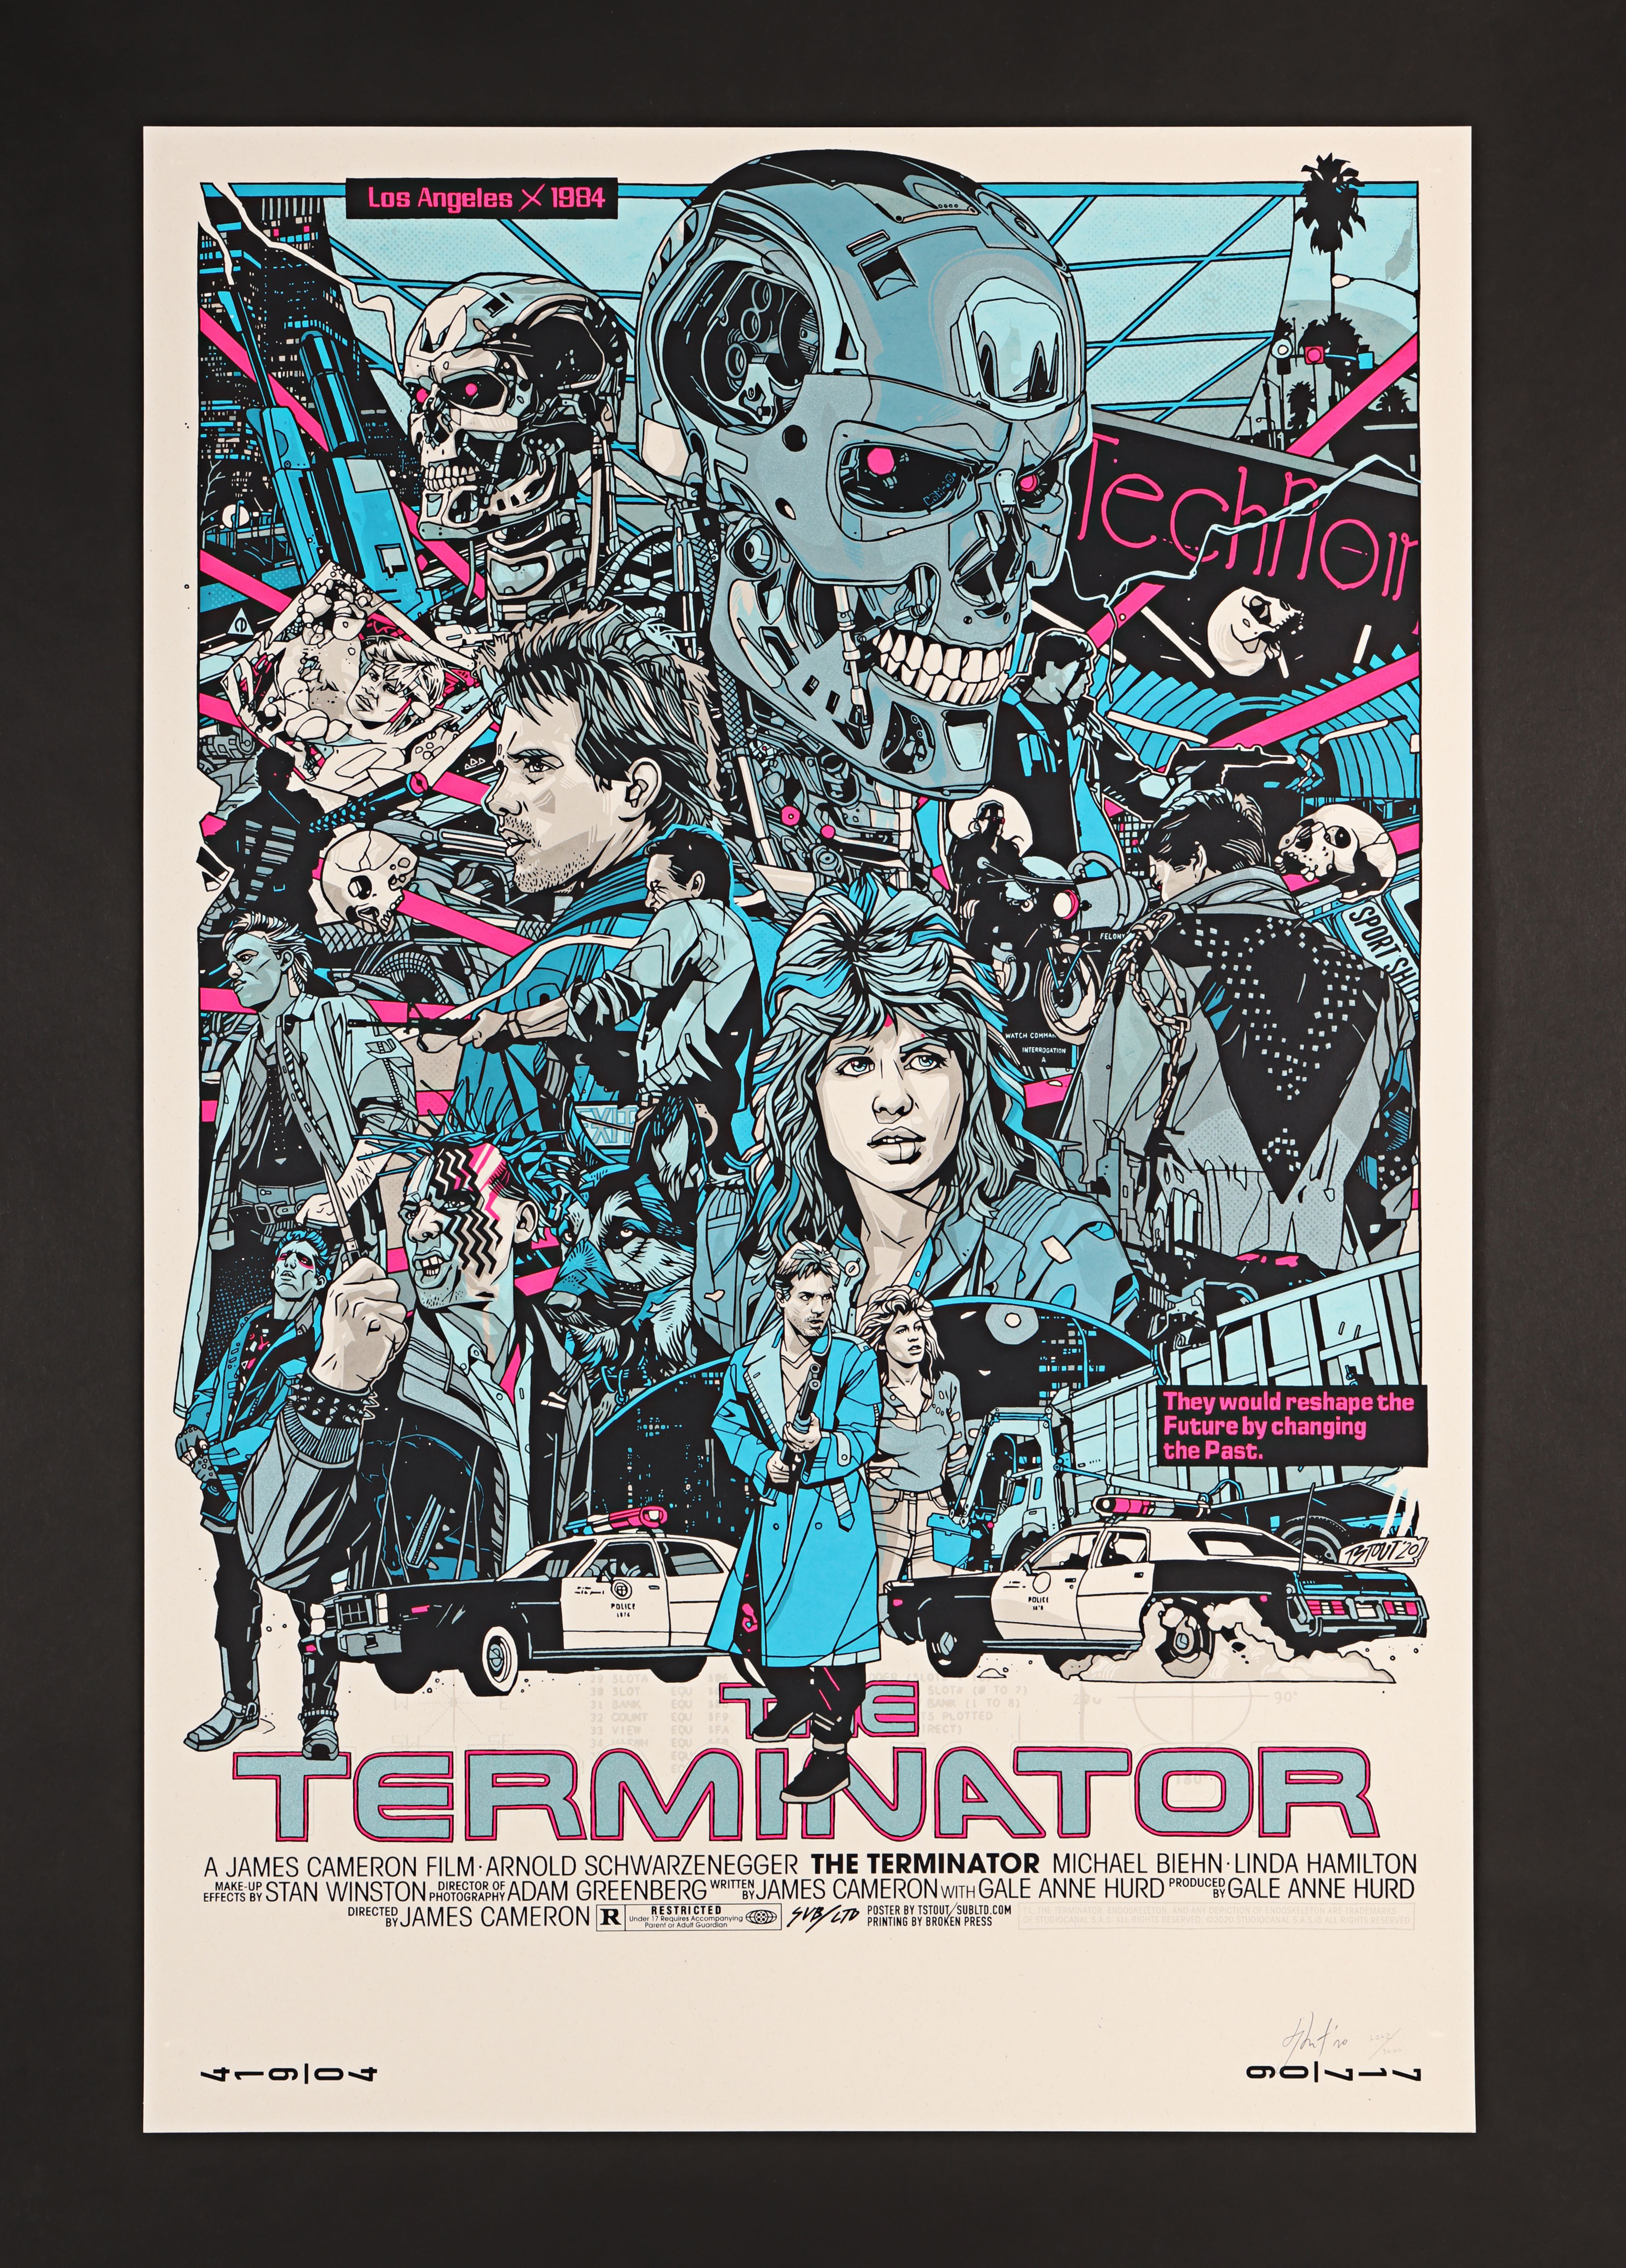 THE TERMINATOR (1984) - Signed, Dated and Hand-Numbered Timed Edition Print by Tyler Stout, 2020